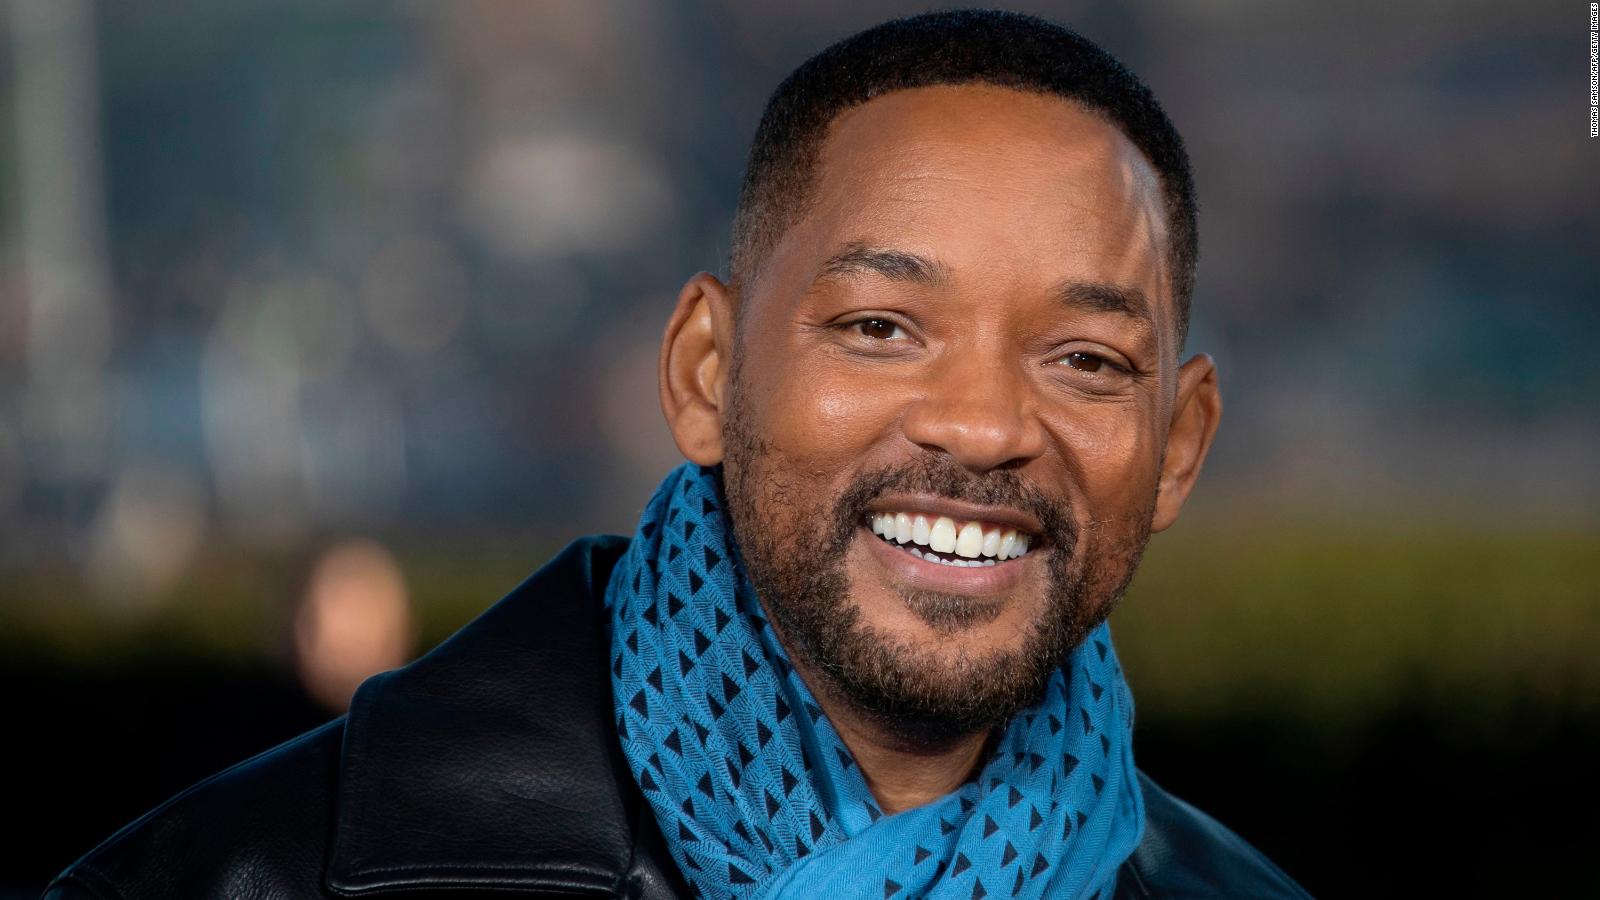 Will Smith says he might step into politics one day CNN